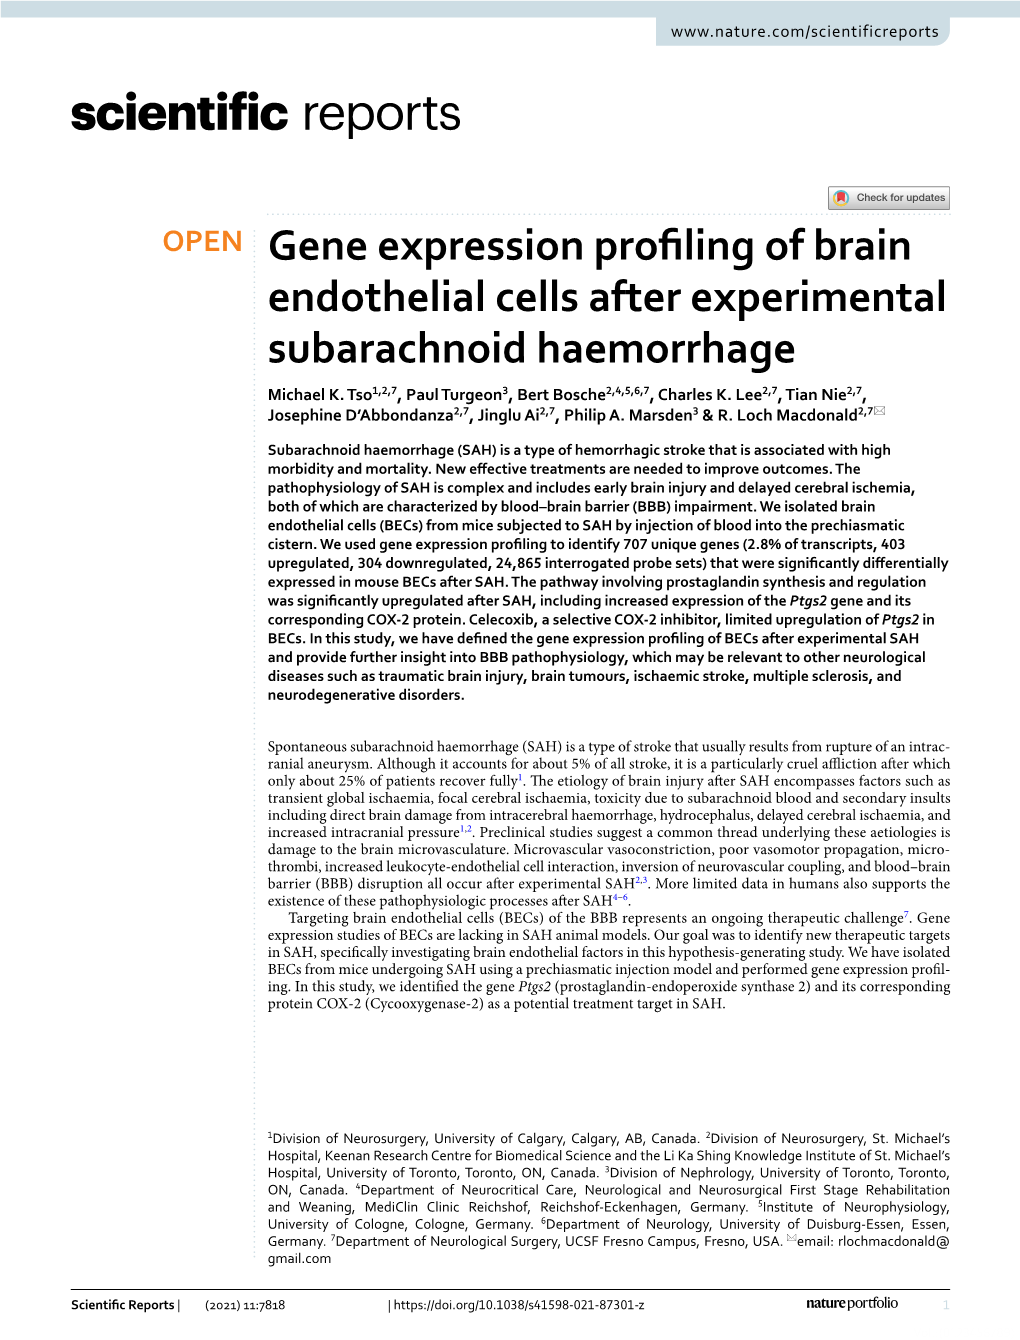 Gene Expression Profiling of Brain Endothelial Cells After Experimental